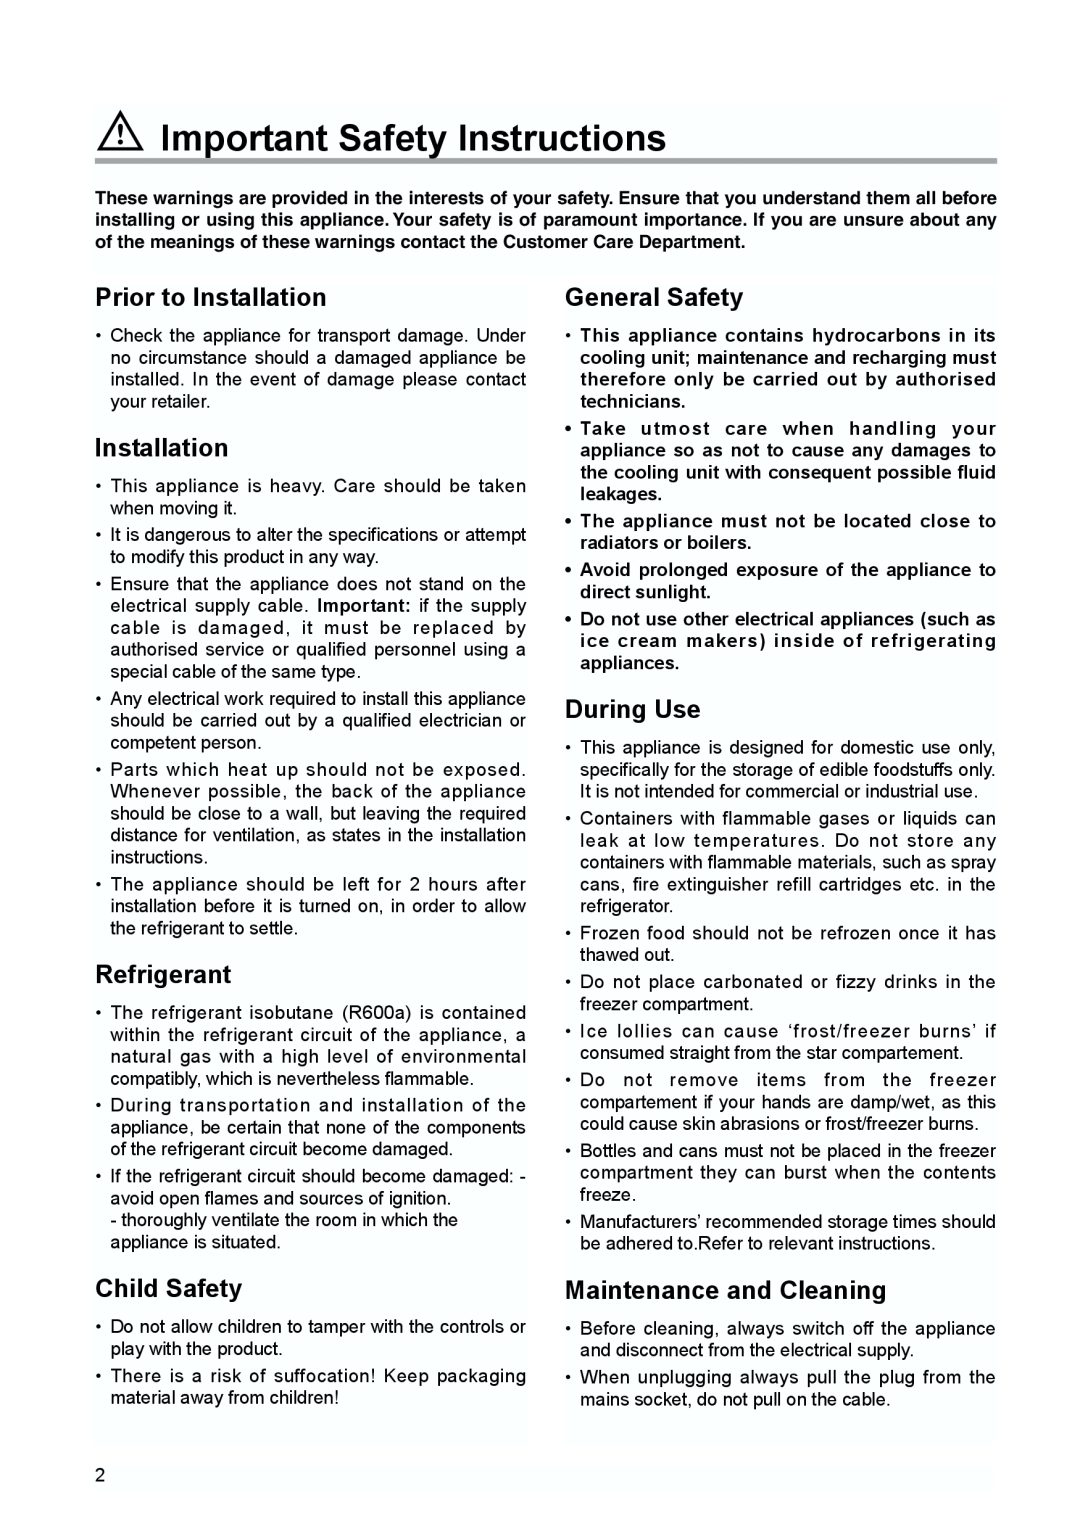 Tricity Bendix TBUR 120 Important Safety Instructions, Prior to Installation, Refrigerant, Child Safety, General Safety 